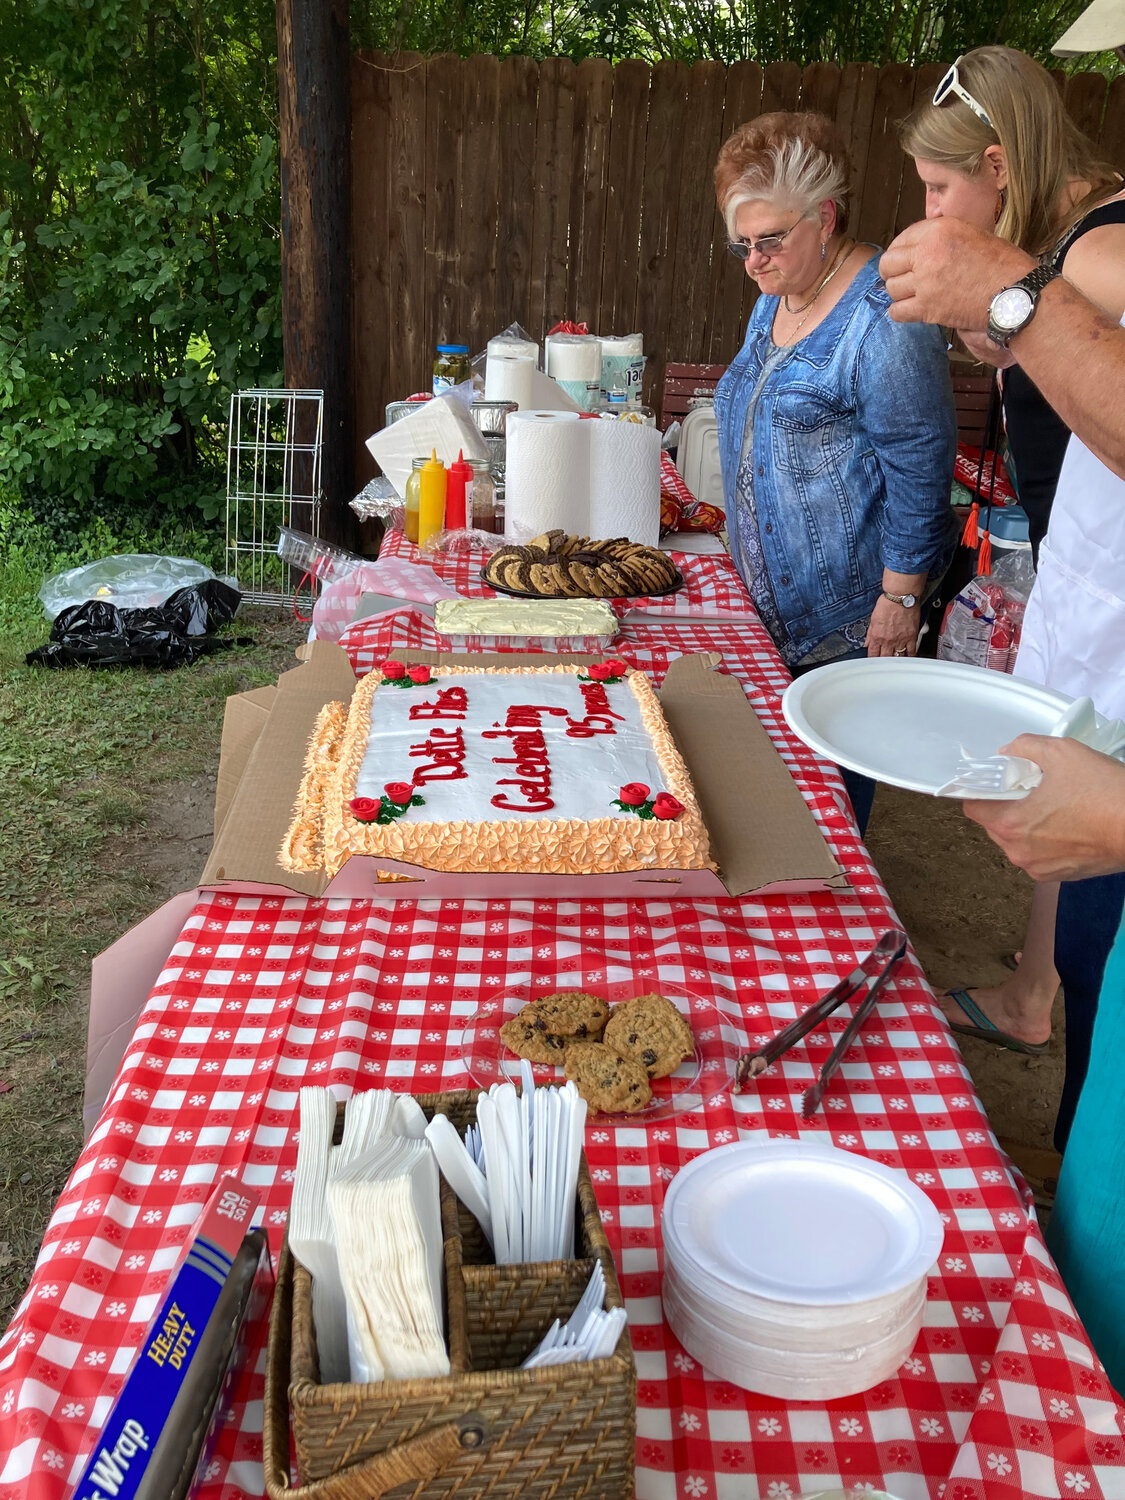 Staff and family of Dette Flies prepared a delicious Pig Roast with all the trimmings capped off by a beautiful cake and cookies to celebrate their 95th Anniversary.